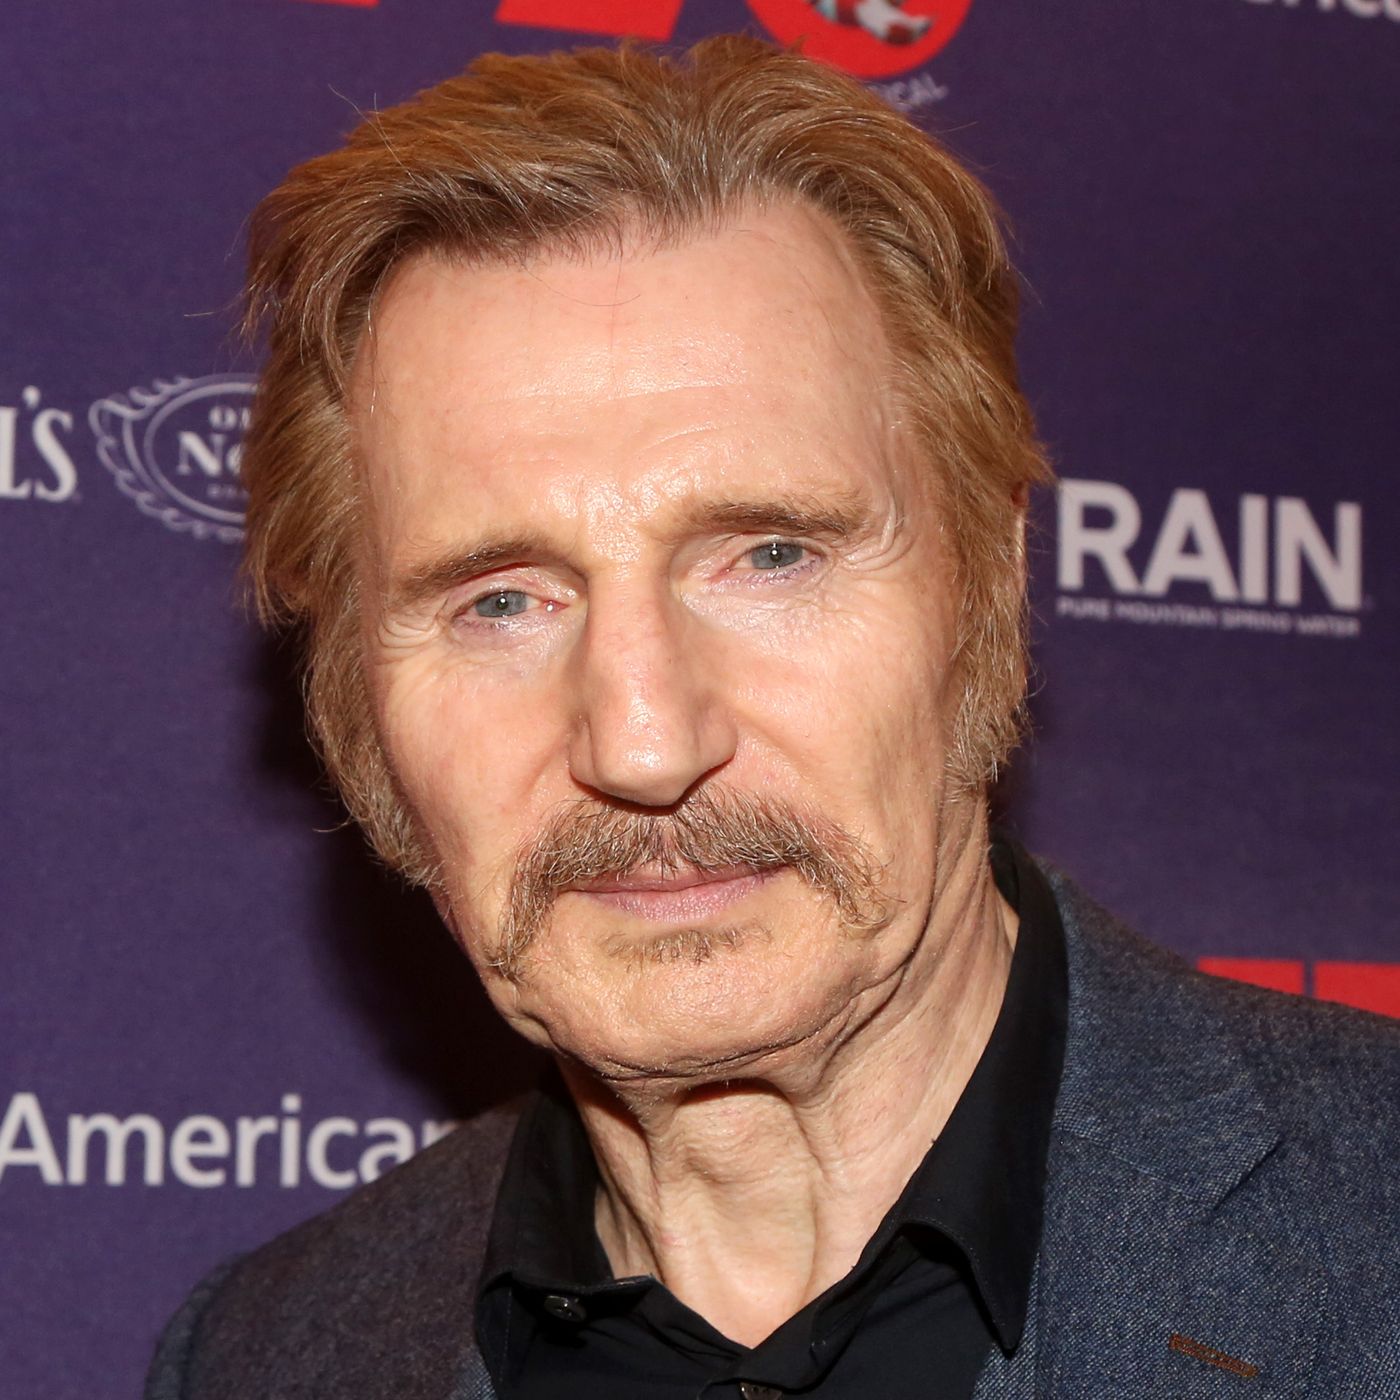 Liam Neeson Thinks 'Star Wars' Spinoffs Dilute the Franchise